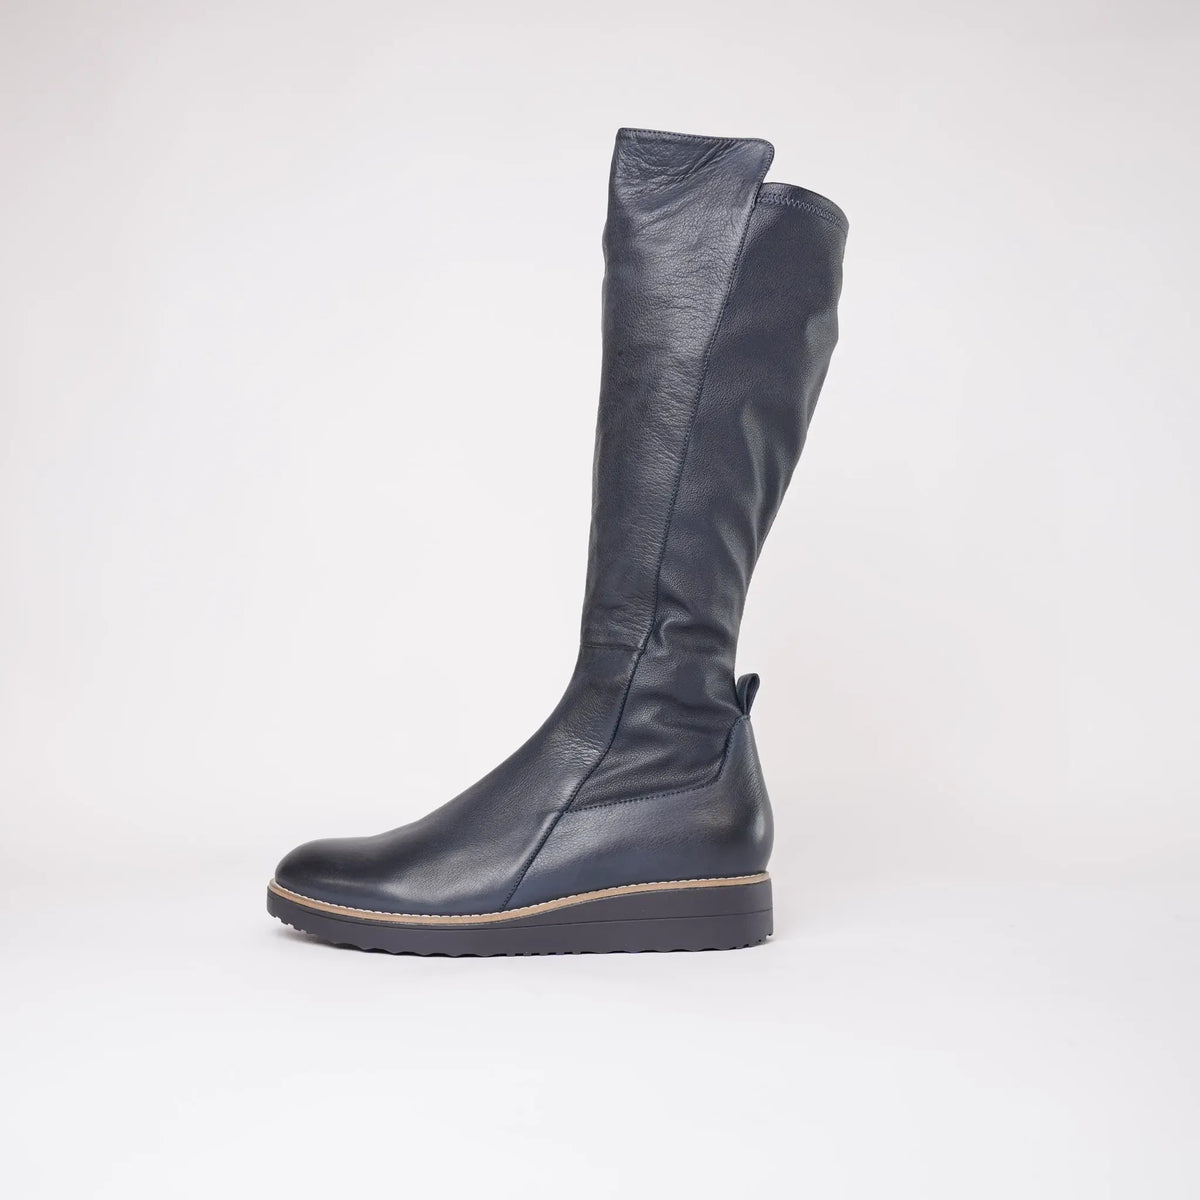 Oletta Navy Leather Knee High Boots